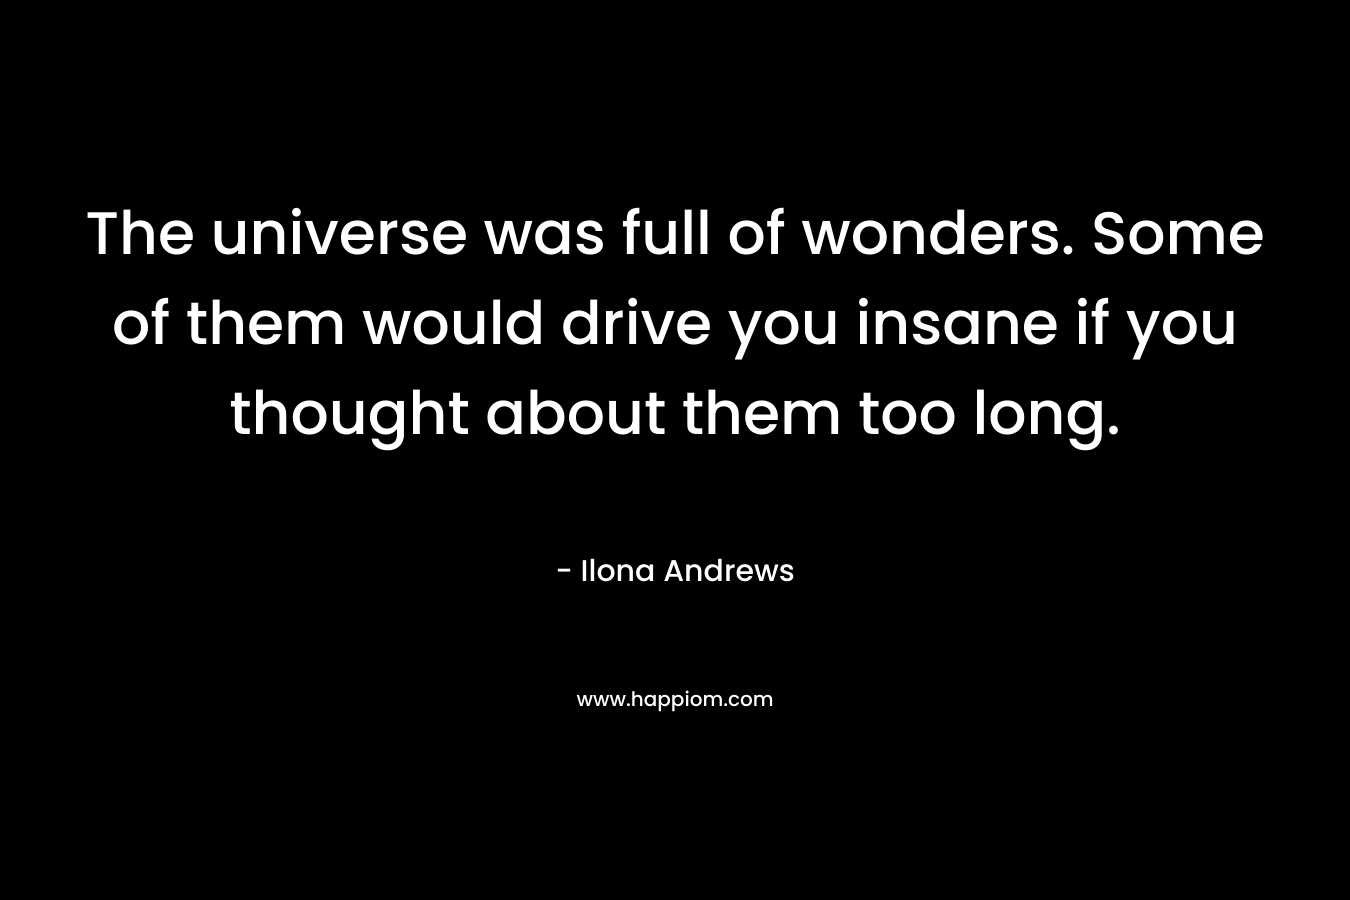 The universe was full of wonders. Some of them would drive you insane if you thought about them too long. – Ilona Andrews